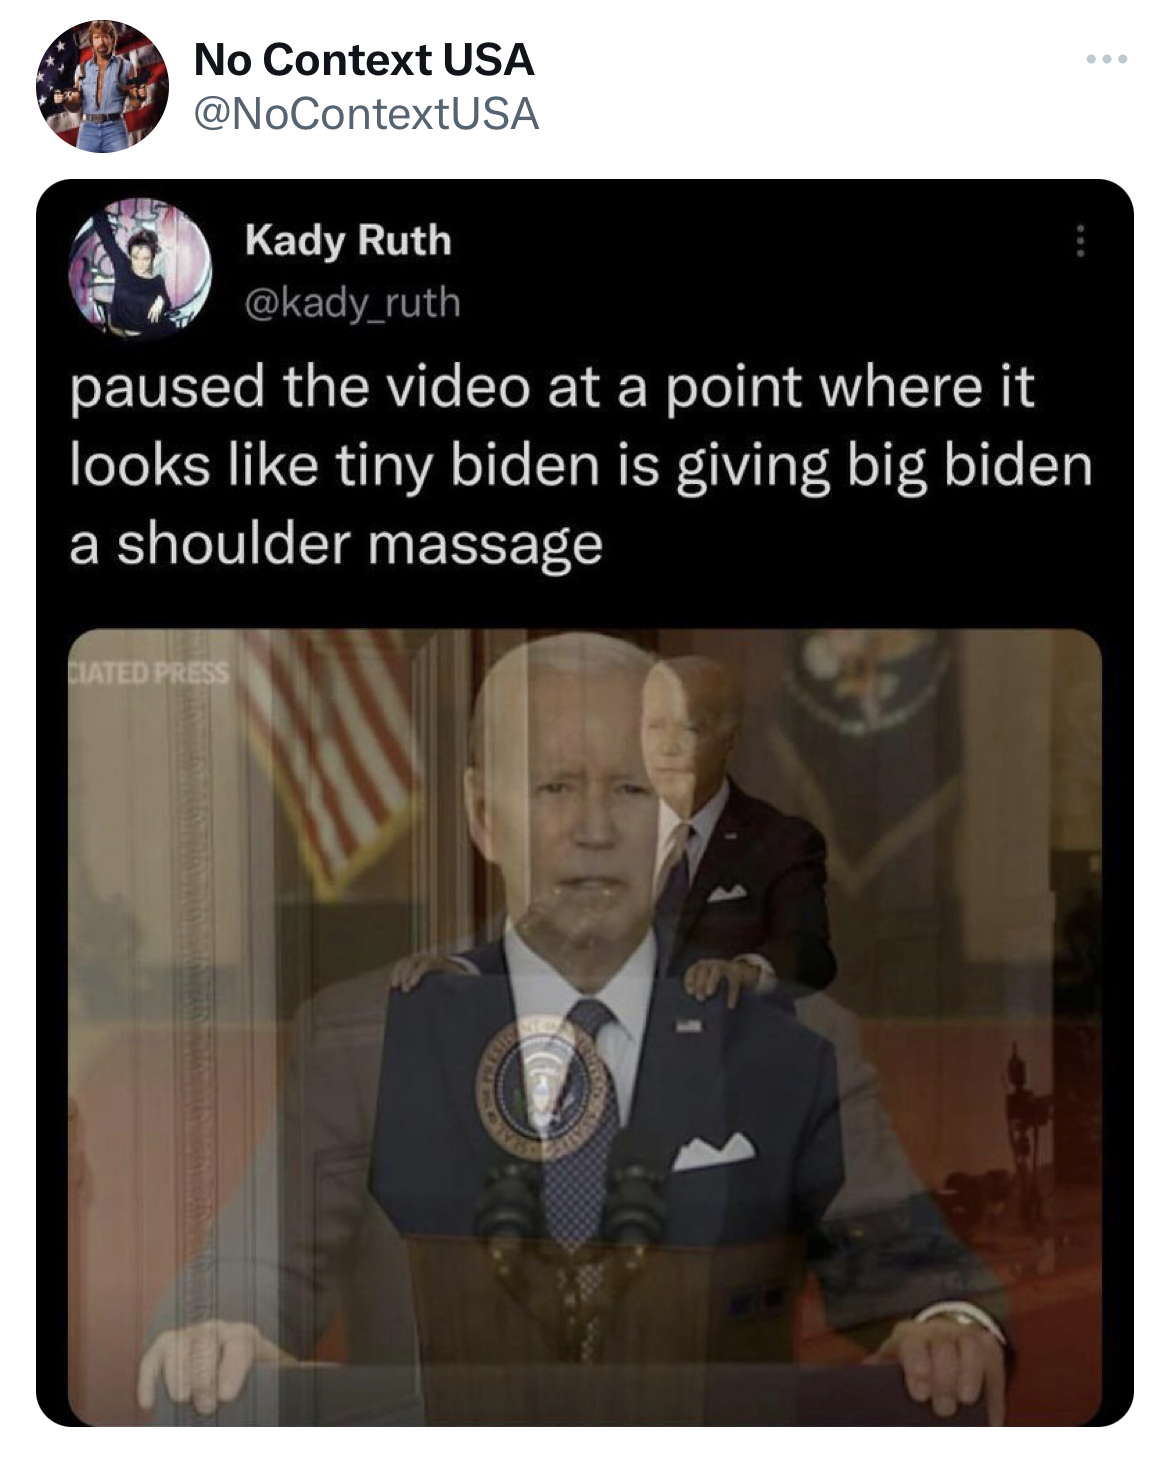 Savage and Unhinged tweets photo caption - No Context Usa Kady Ruth paused the video at a point where it looks tiny biden is giving big biden a shoulder massage Ciated Press